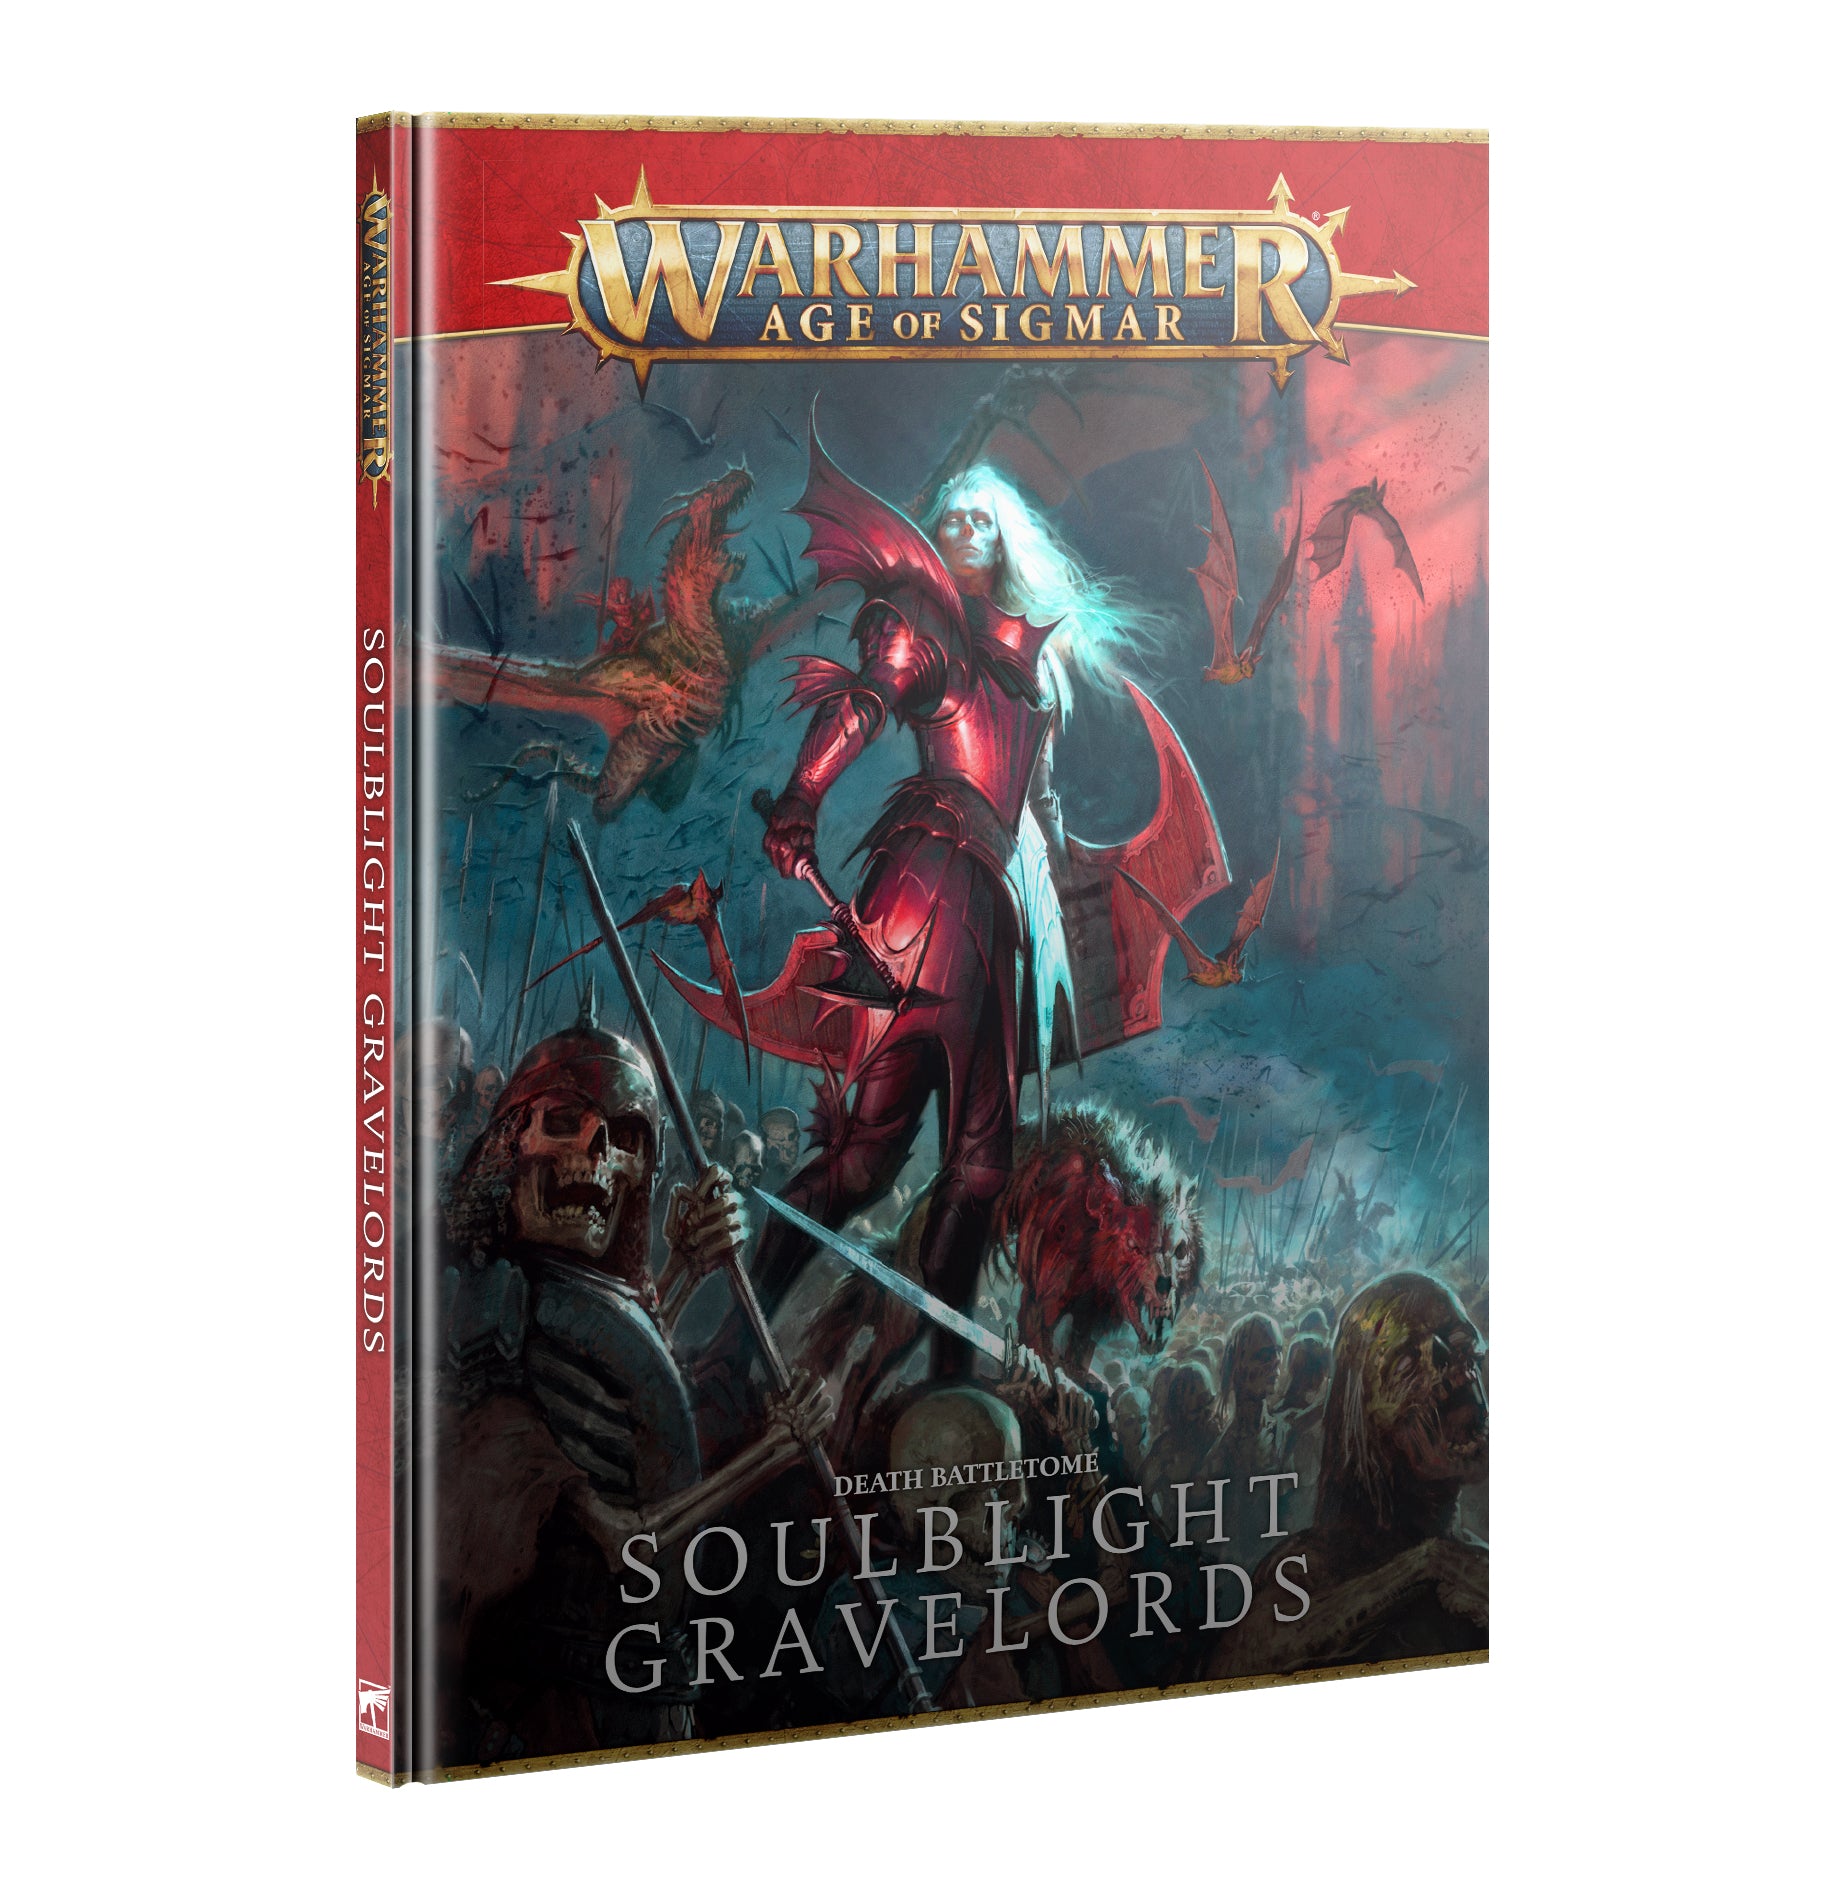 a book cover for a warhammer age of singular